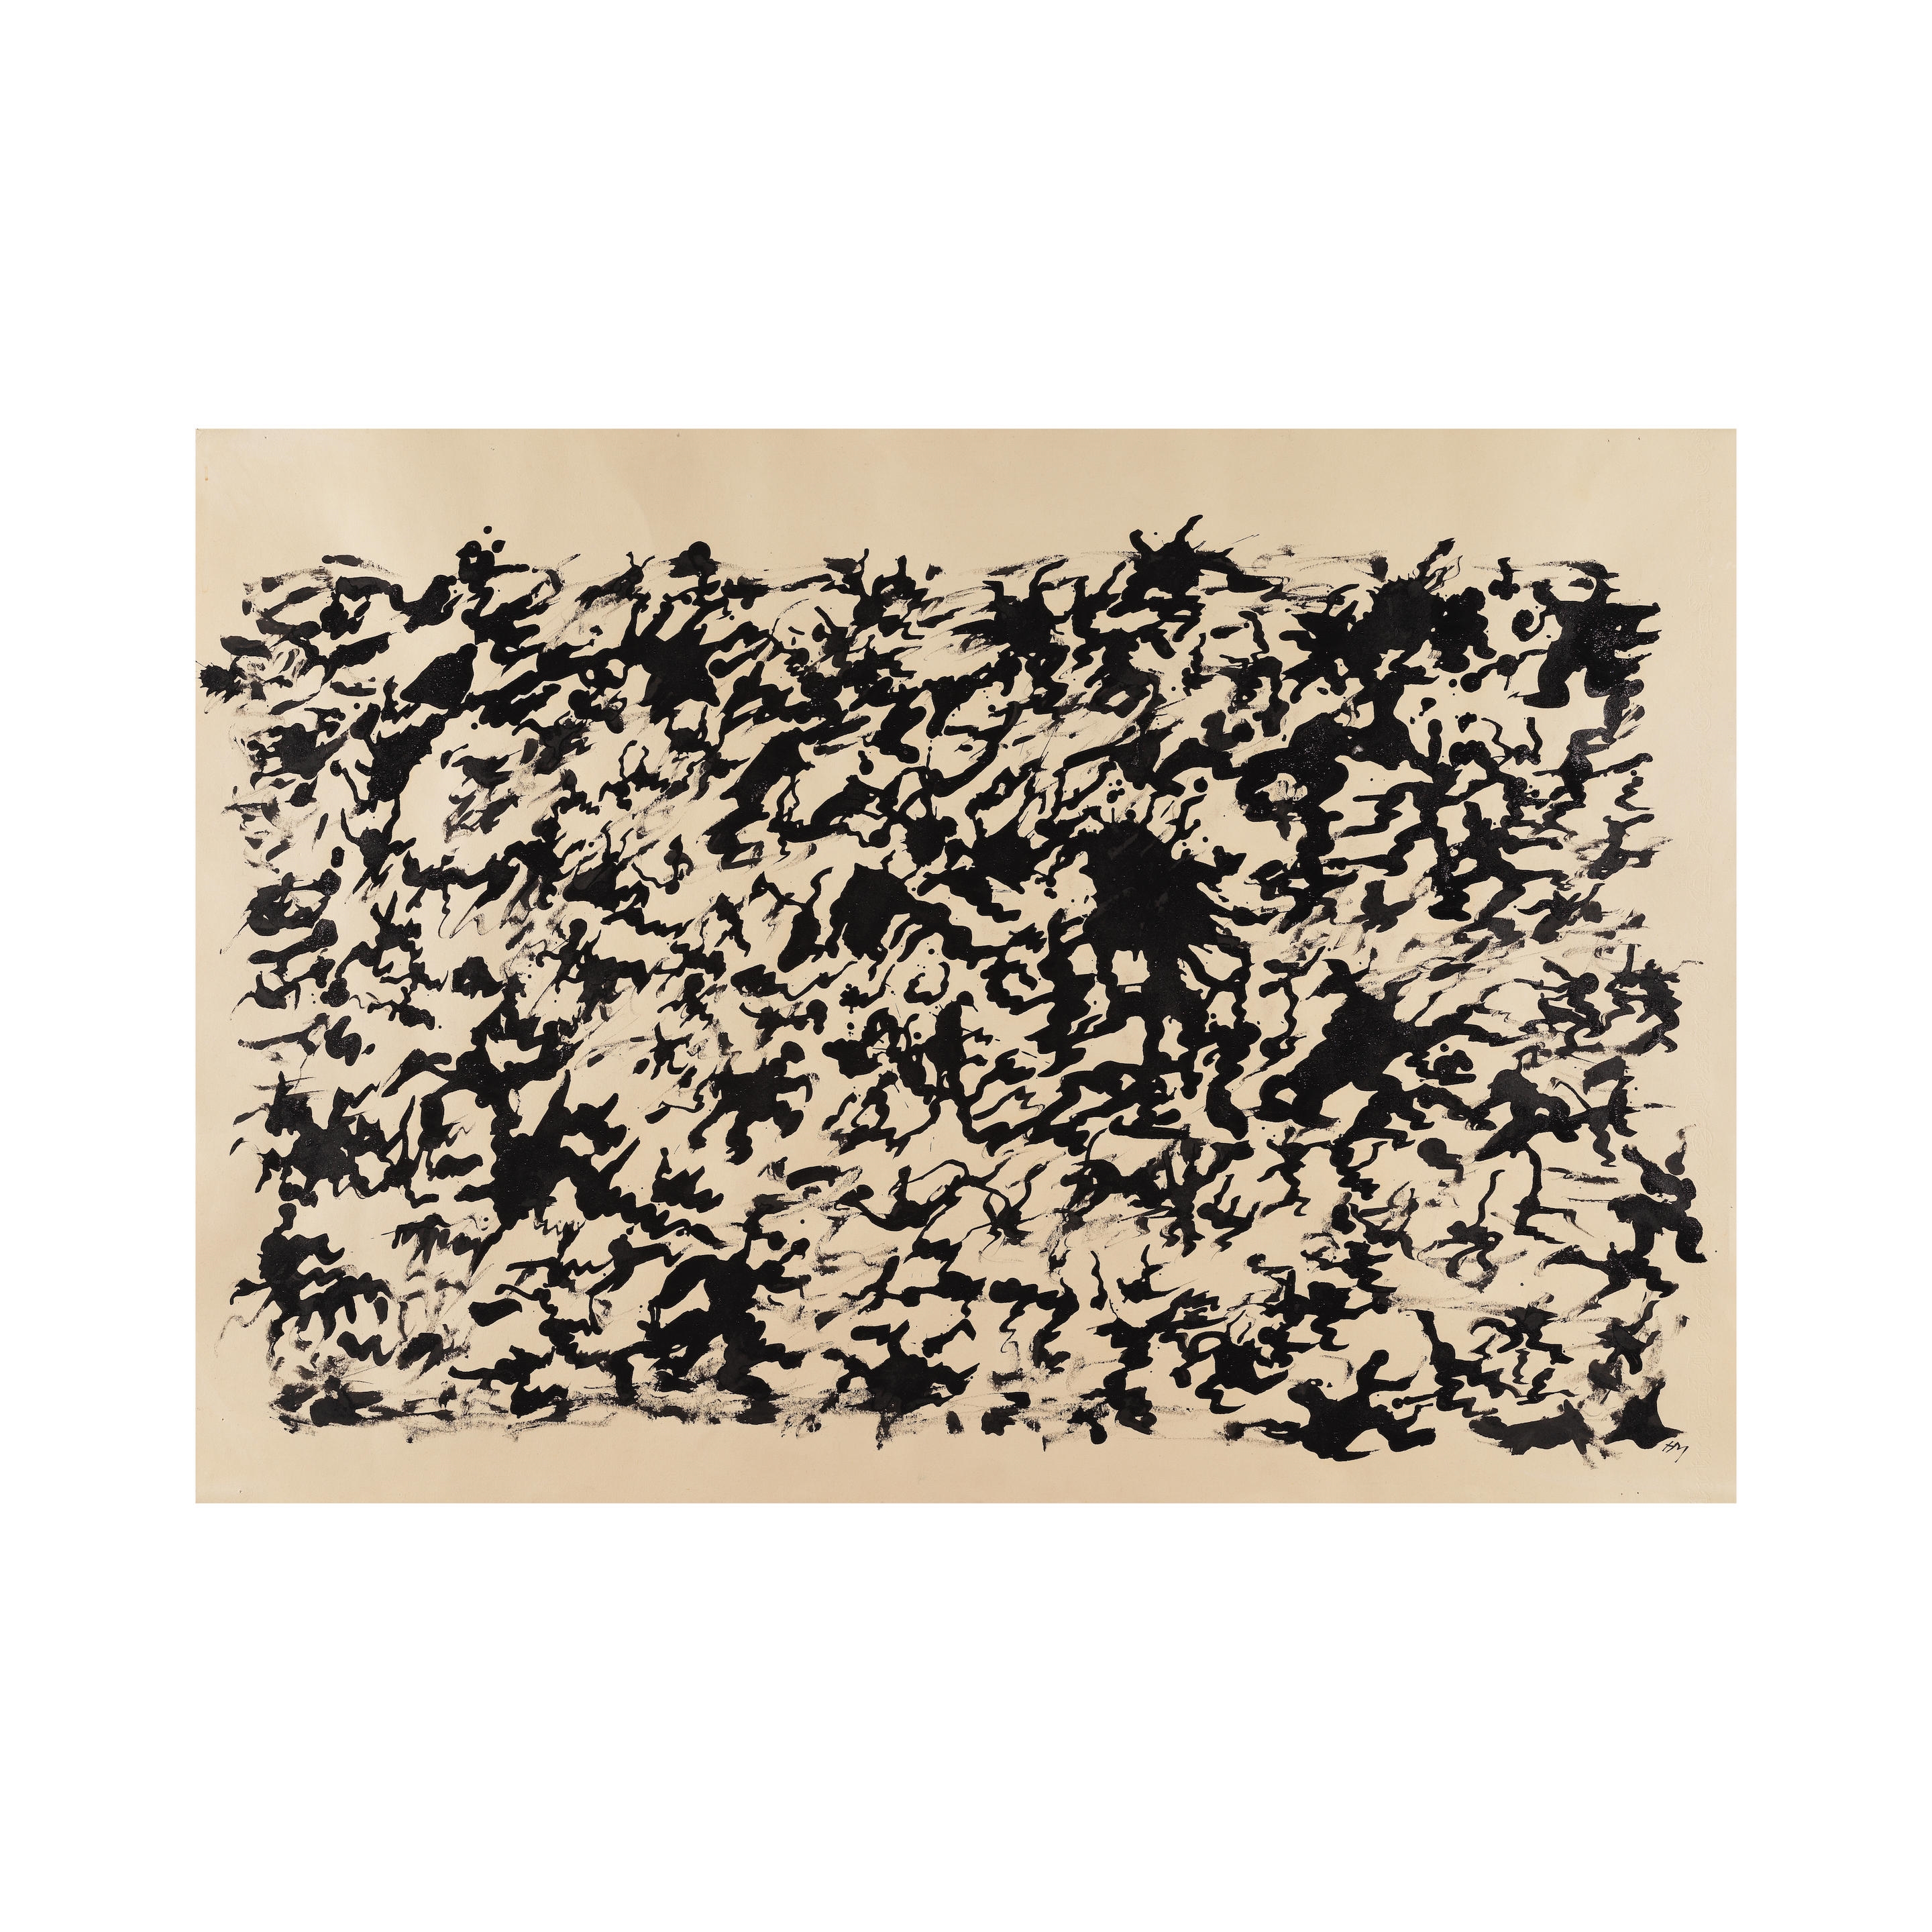 Artwork by Henri Michaux, Sans titre, Made of india ink on paper